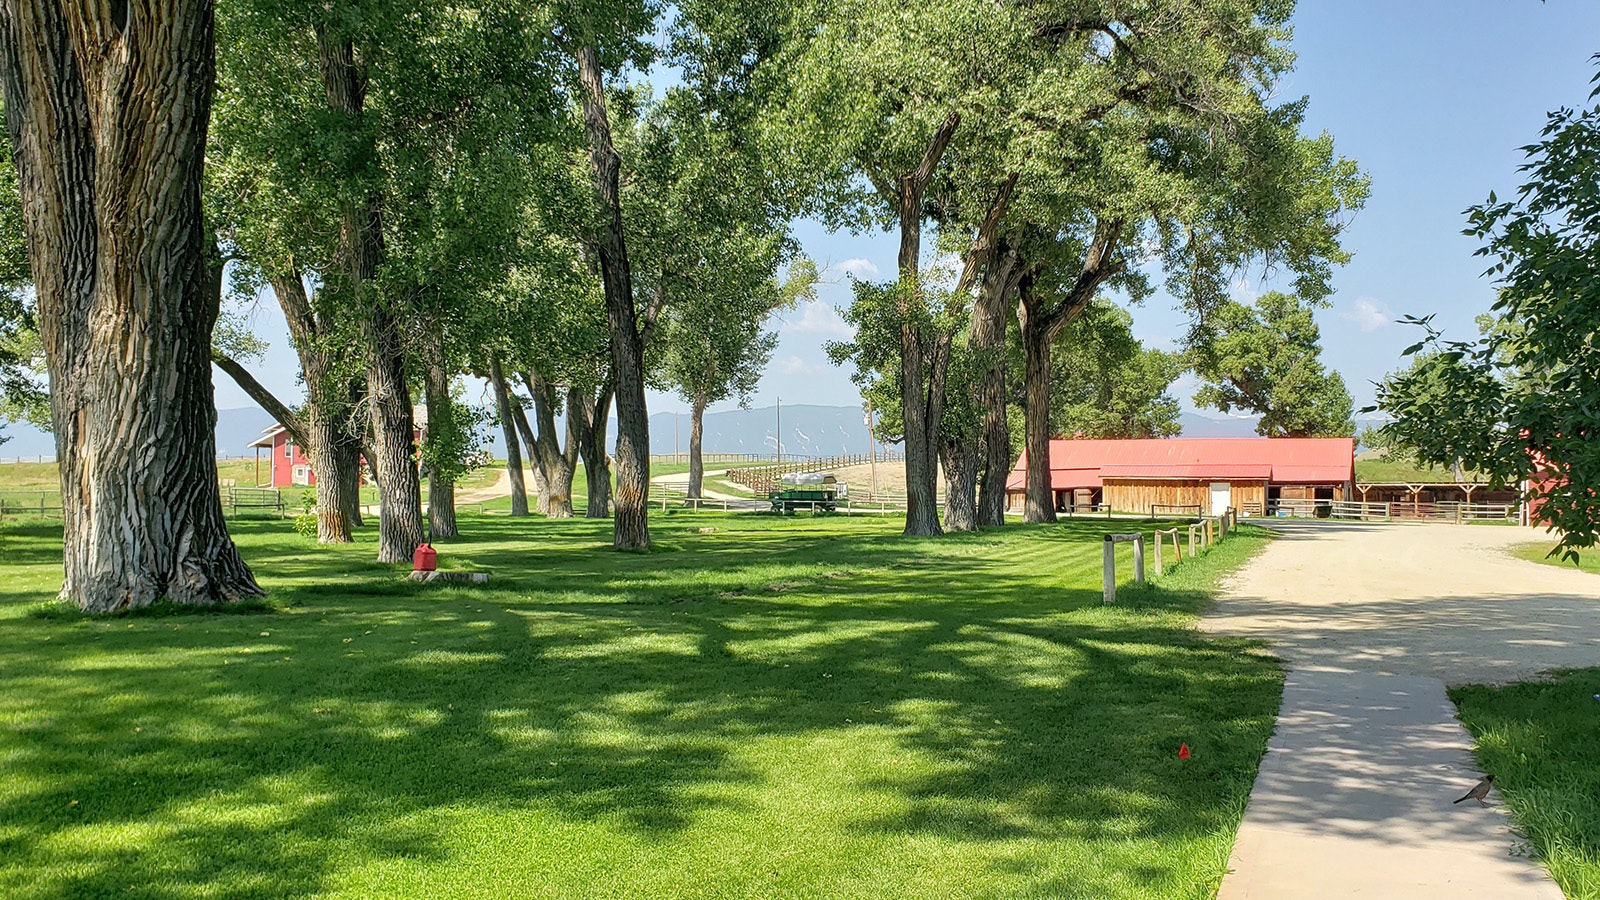 The grounds at the TA Ranch.